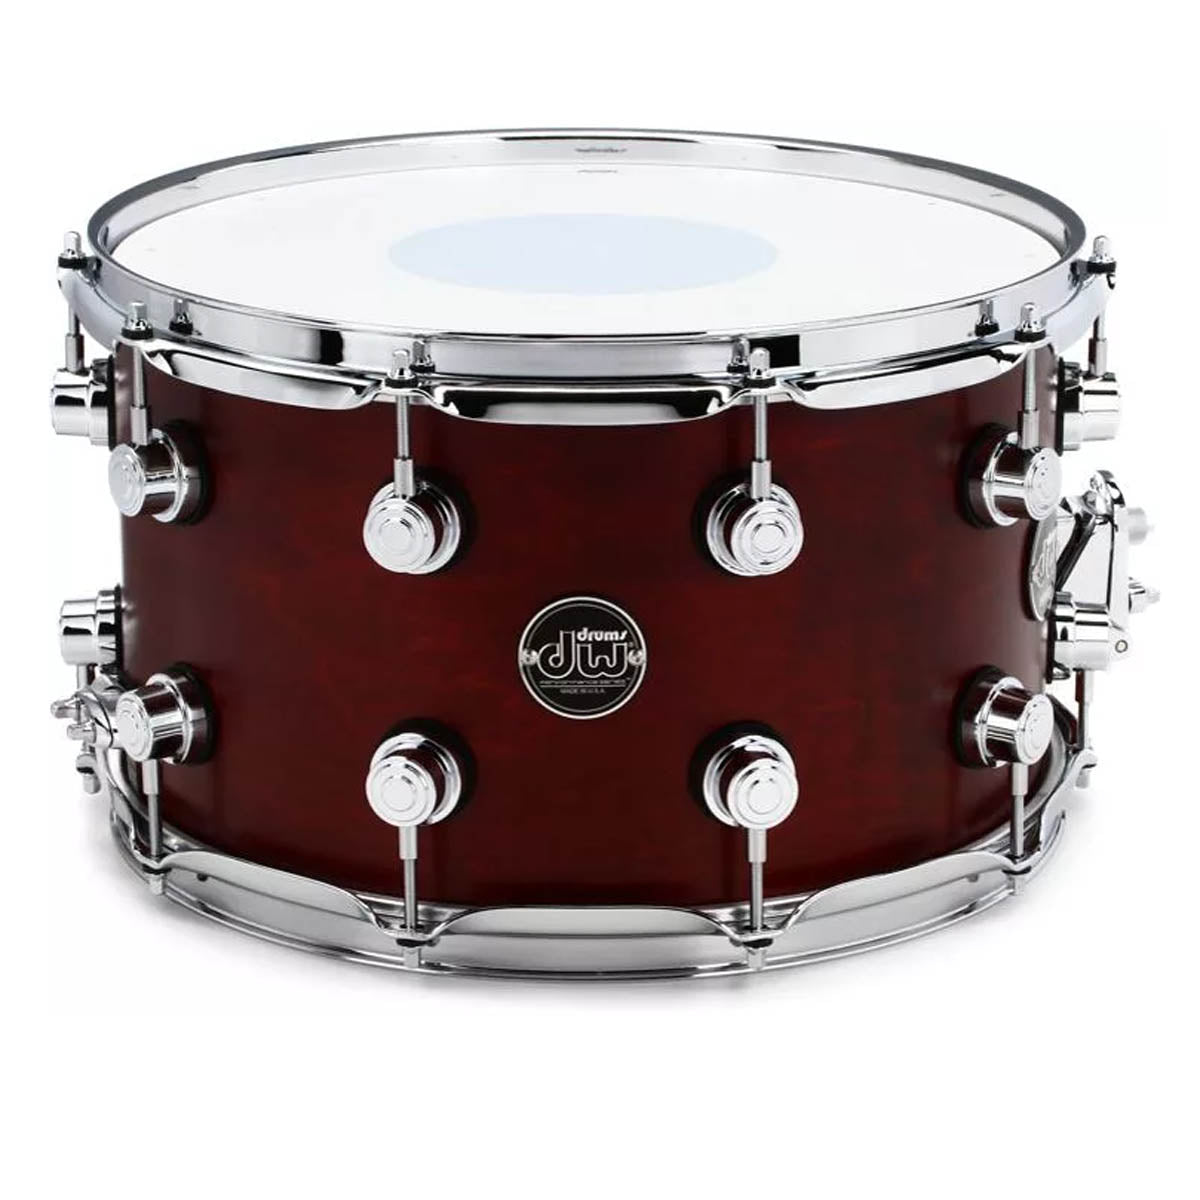 DW Performance Series 14"x8" Maple Snare Drum